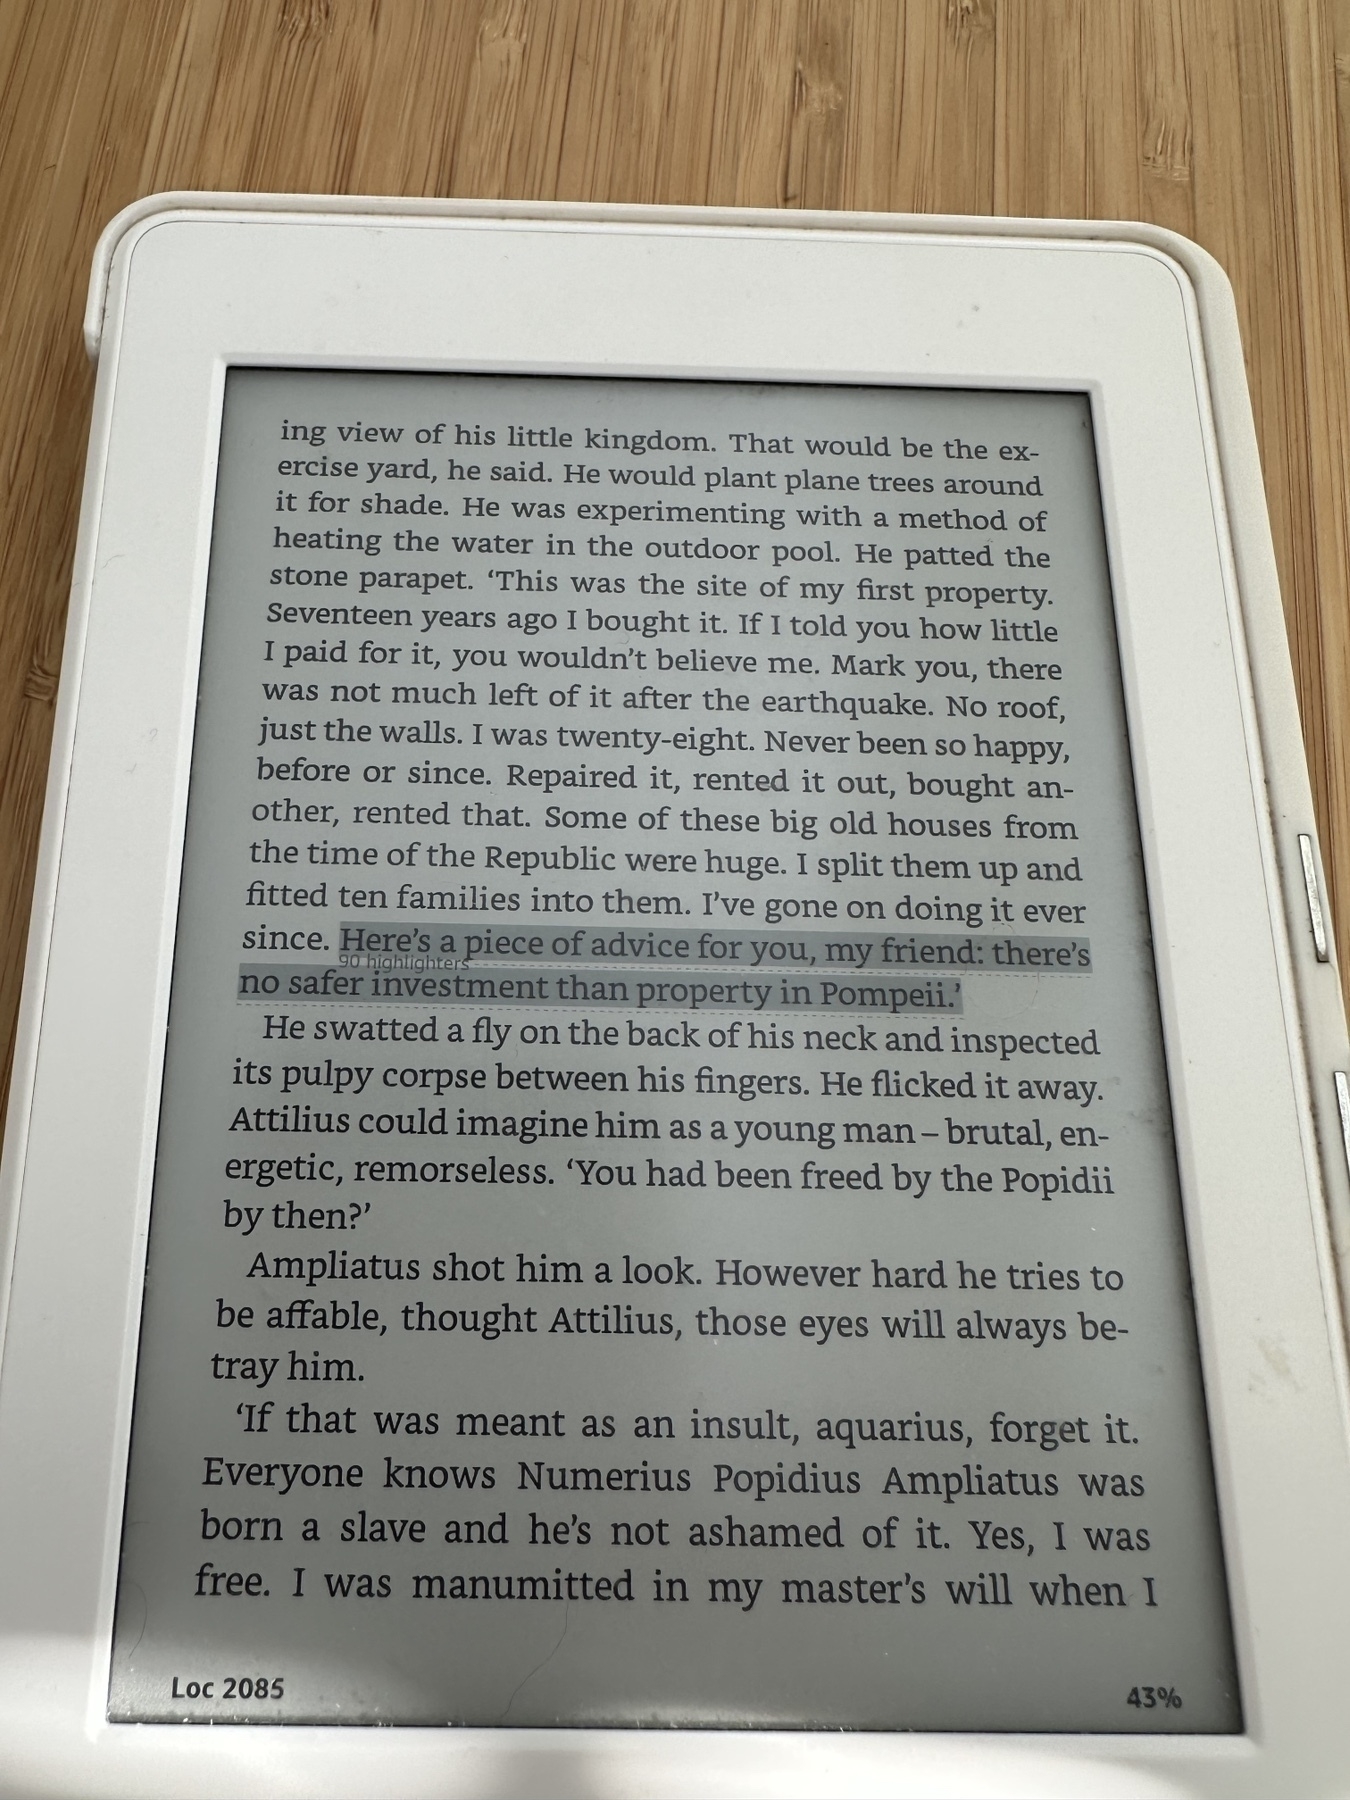 a picture of a kindle reader. Book "Pompeii" open on a page containing a highlight "Here's a piece of advice for you, my friend: 'there's no safer investment than property in Pompeii'